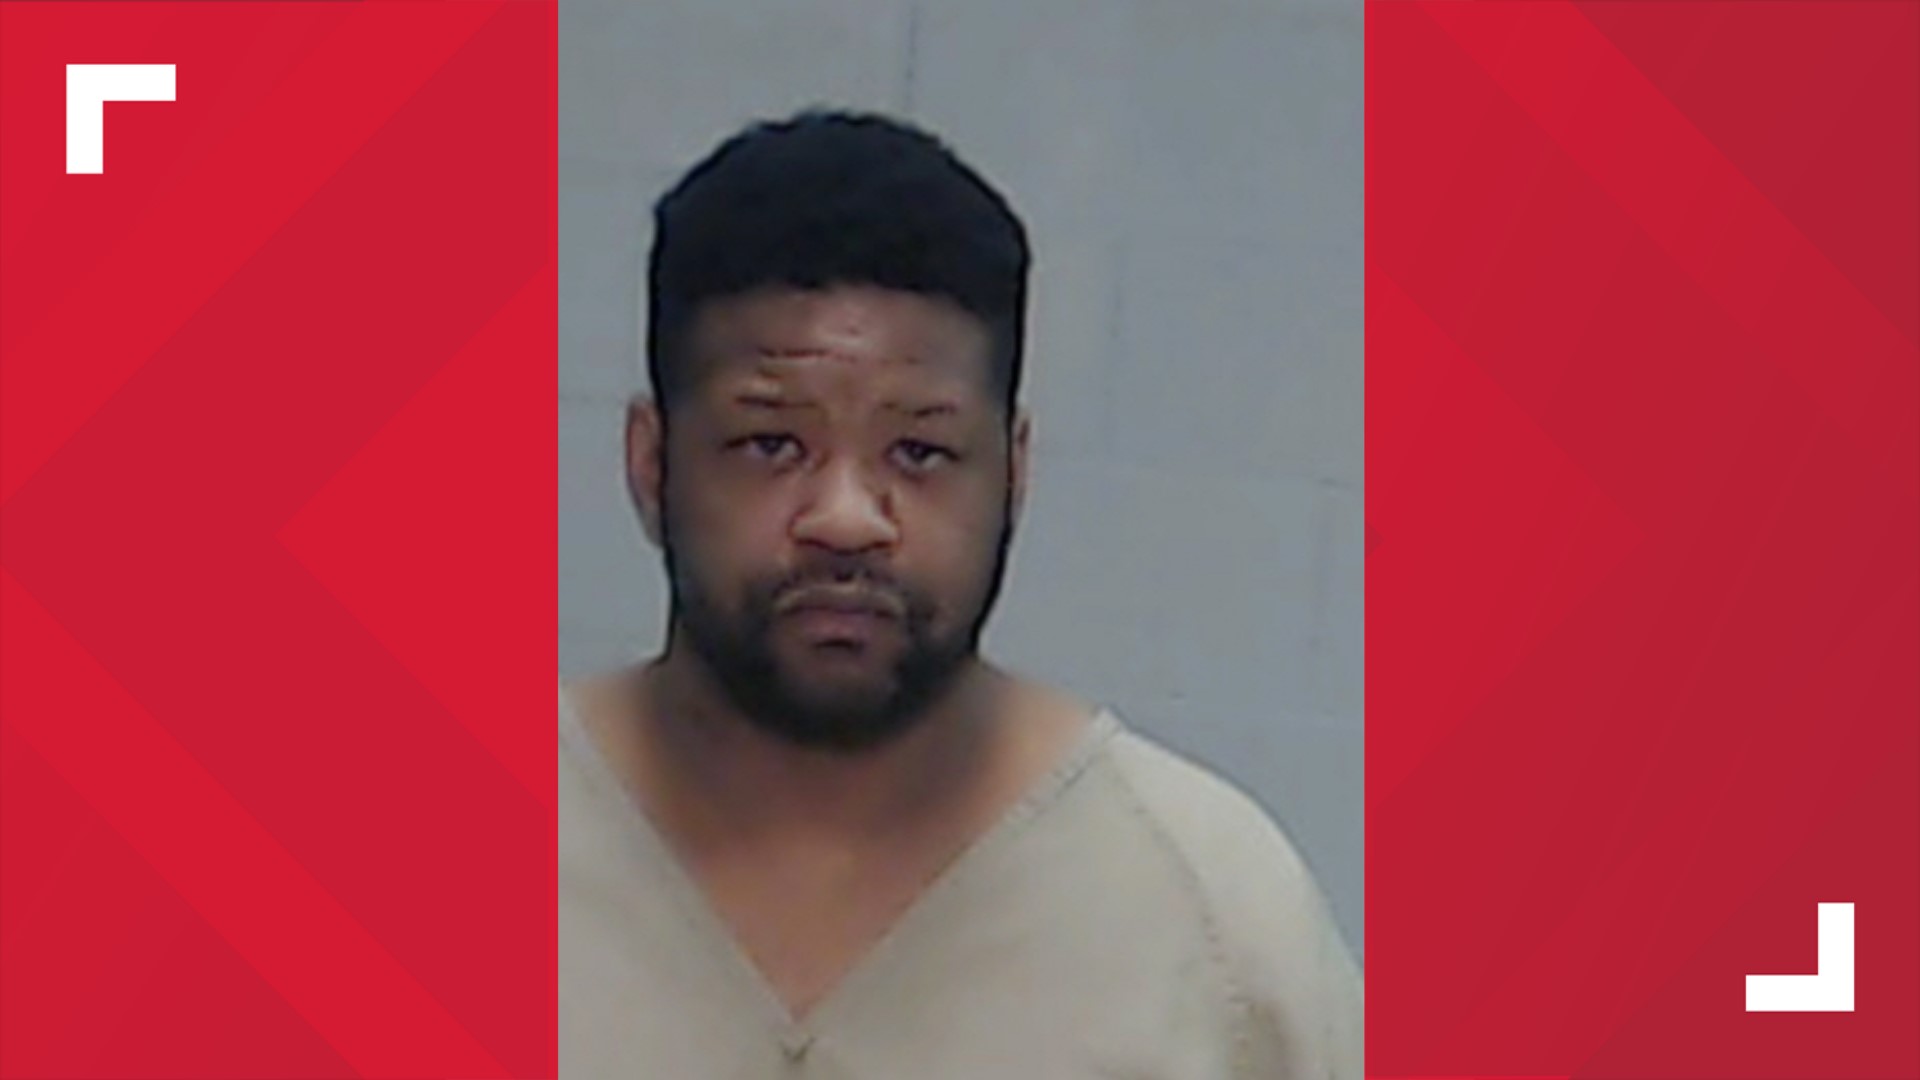 Rondale Farris was accused of shooting and killing a man outside a convenience store in 2018.